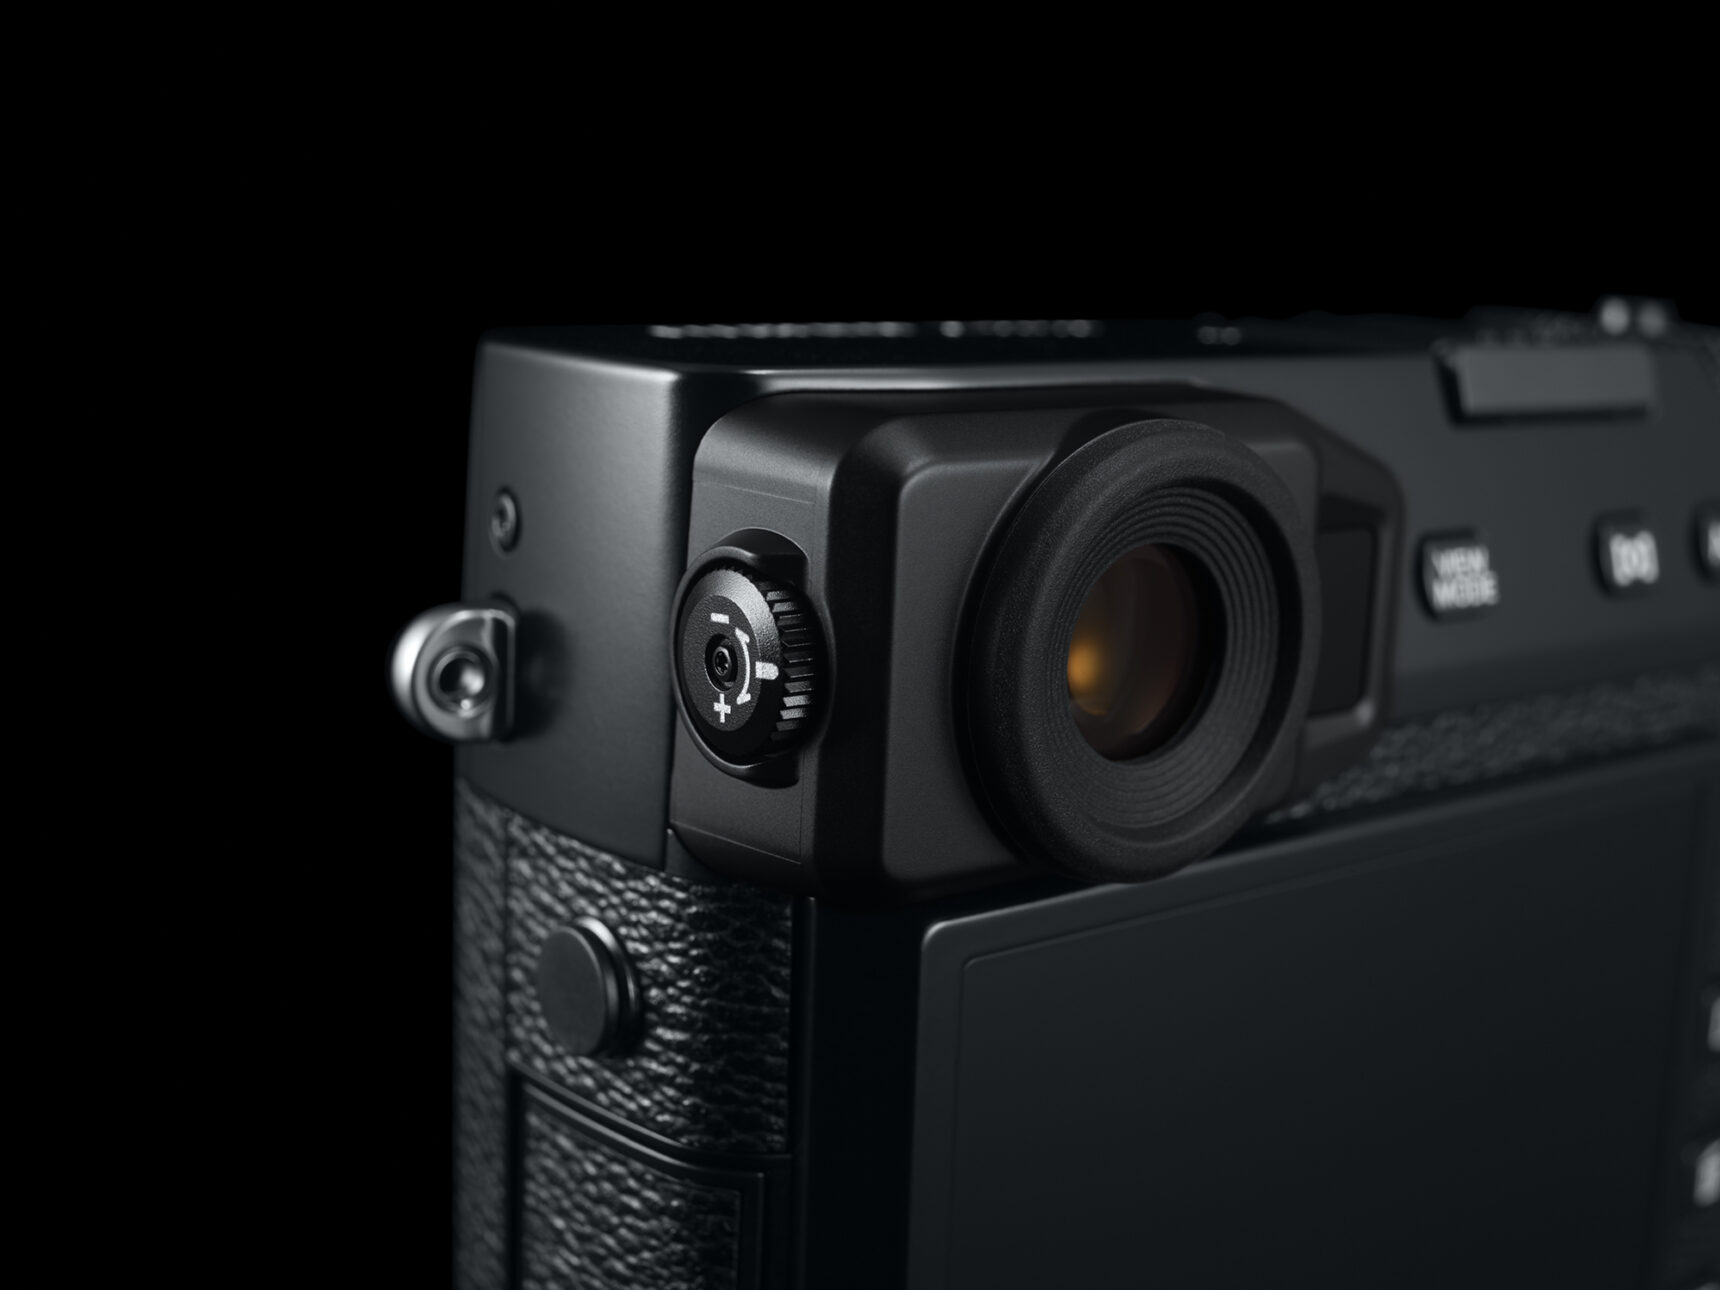 Fuji X-Pro2 Street Photography Review - Diopter